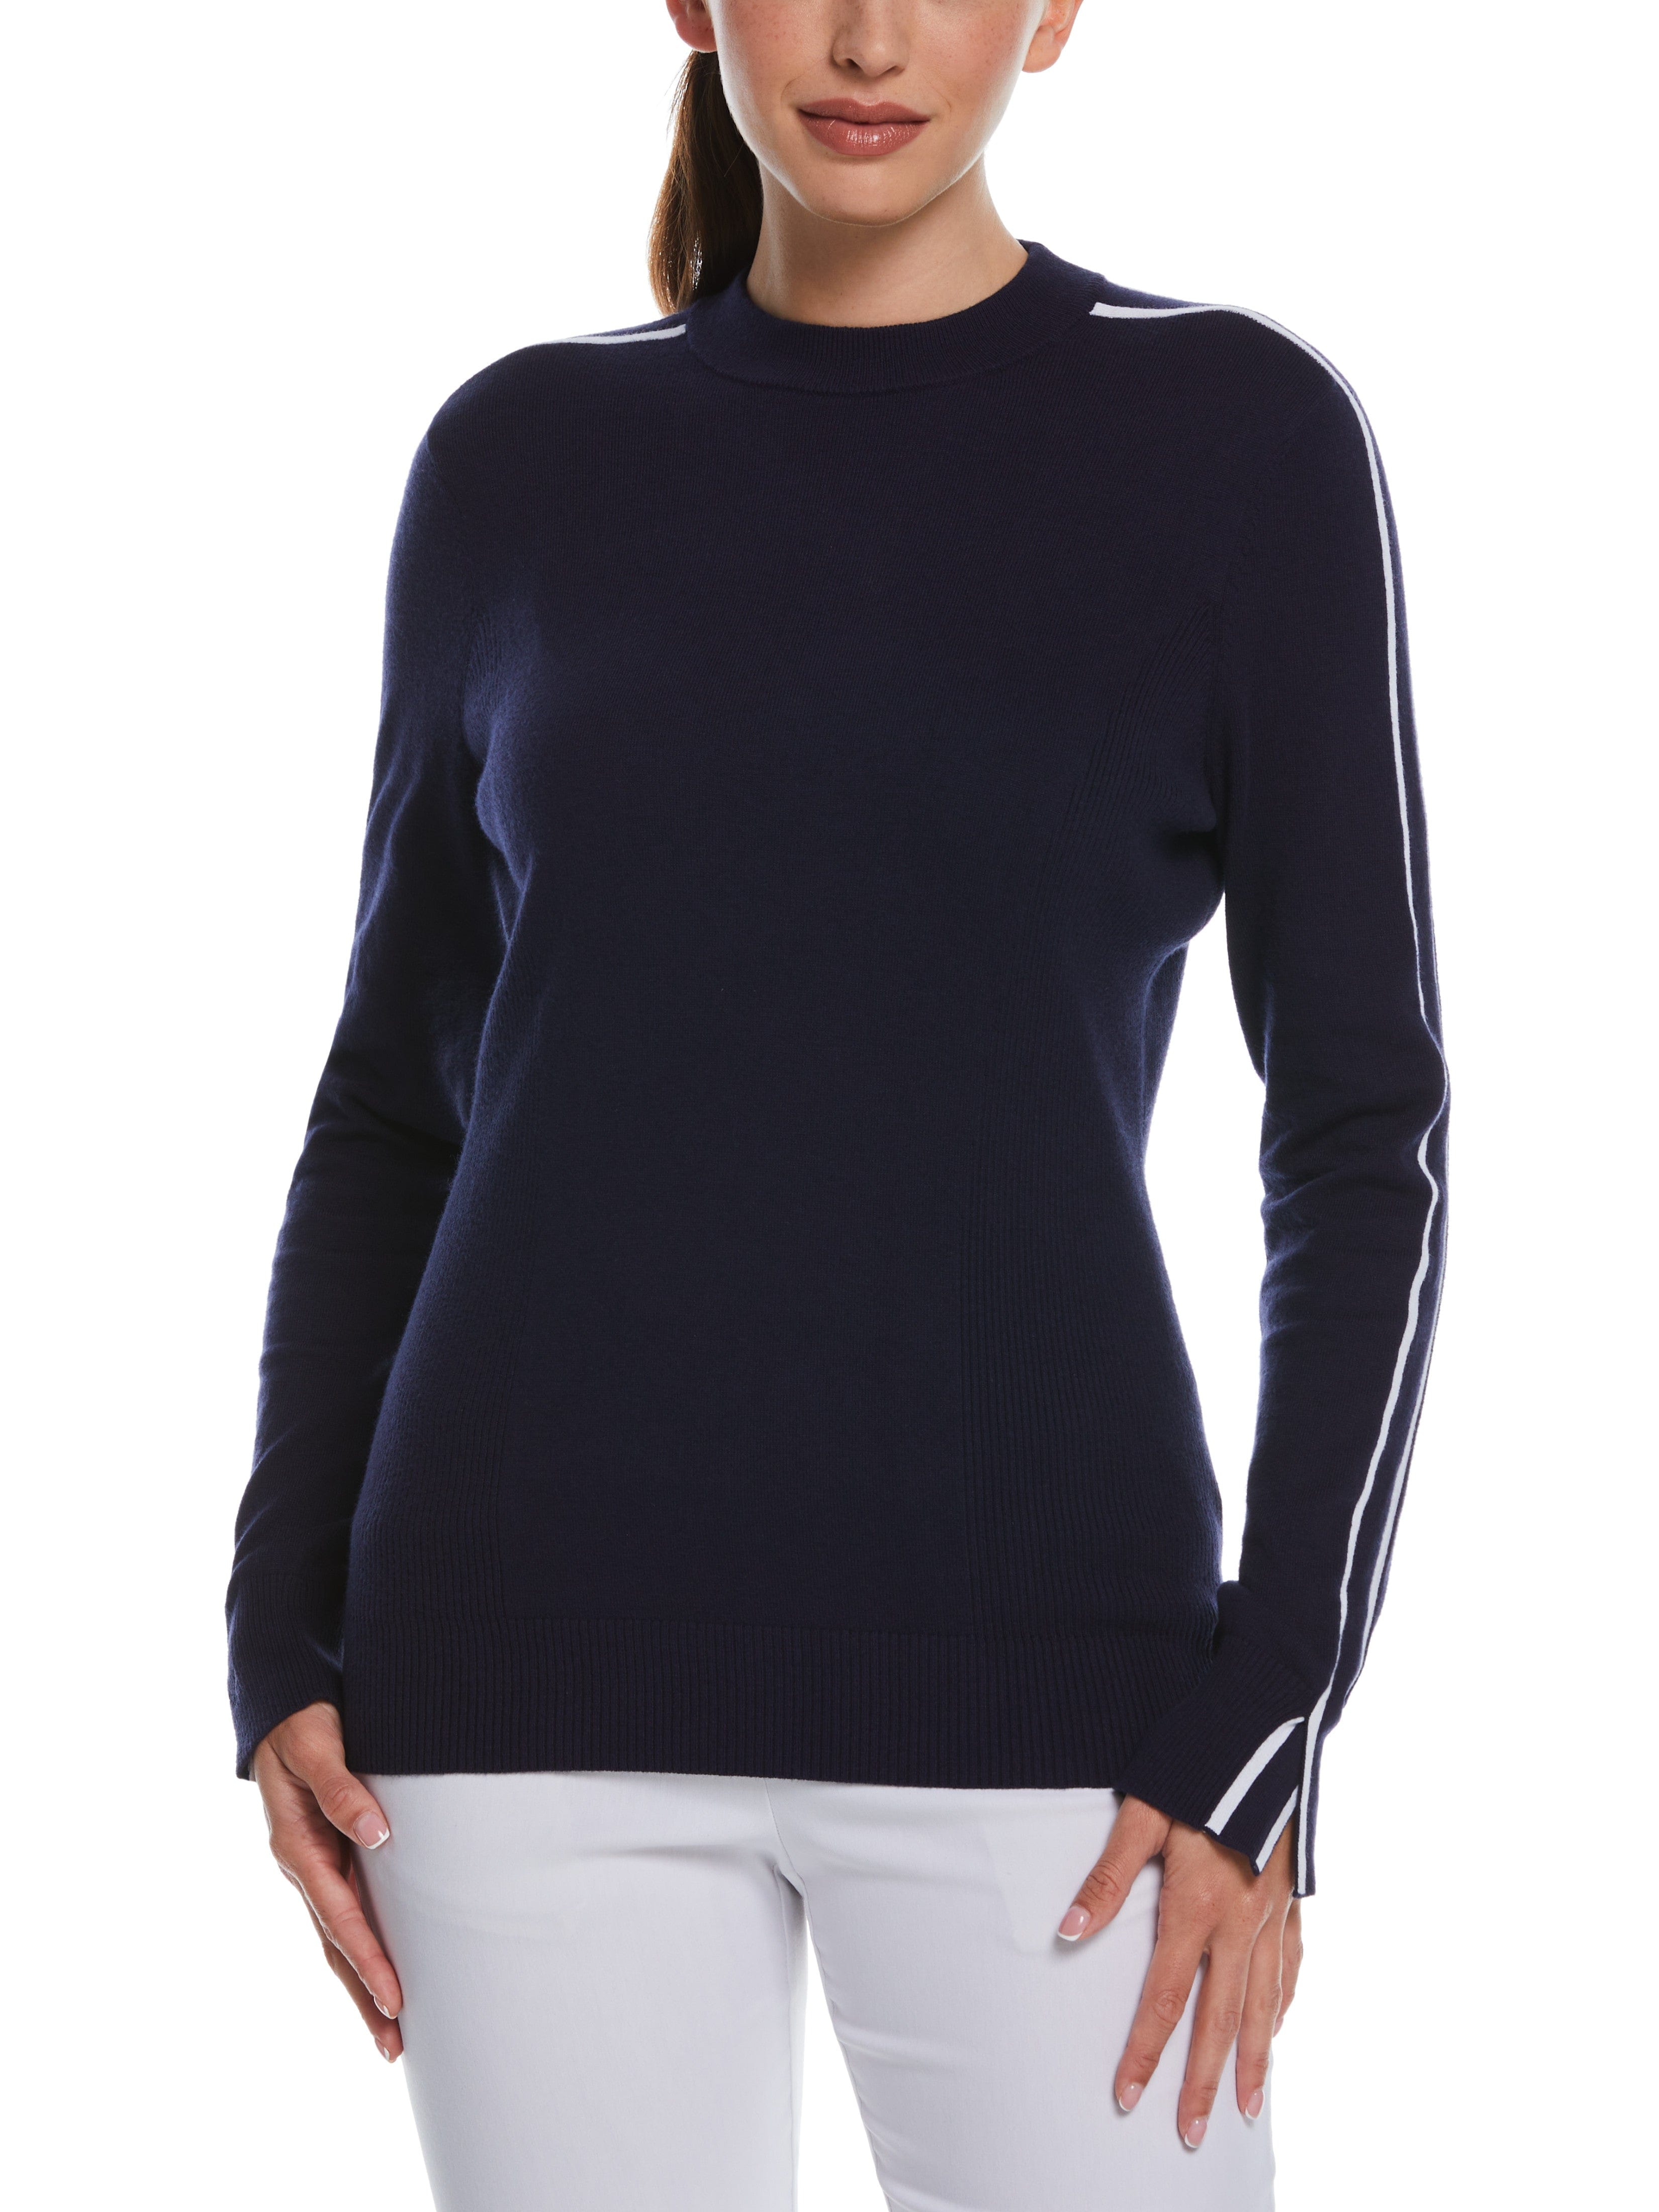 The mock neck – Permanent Style